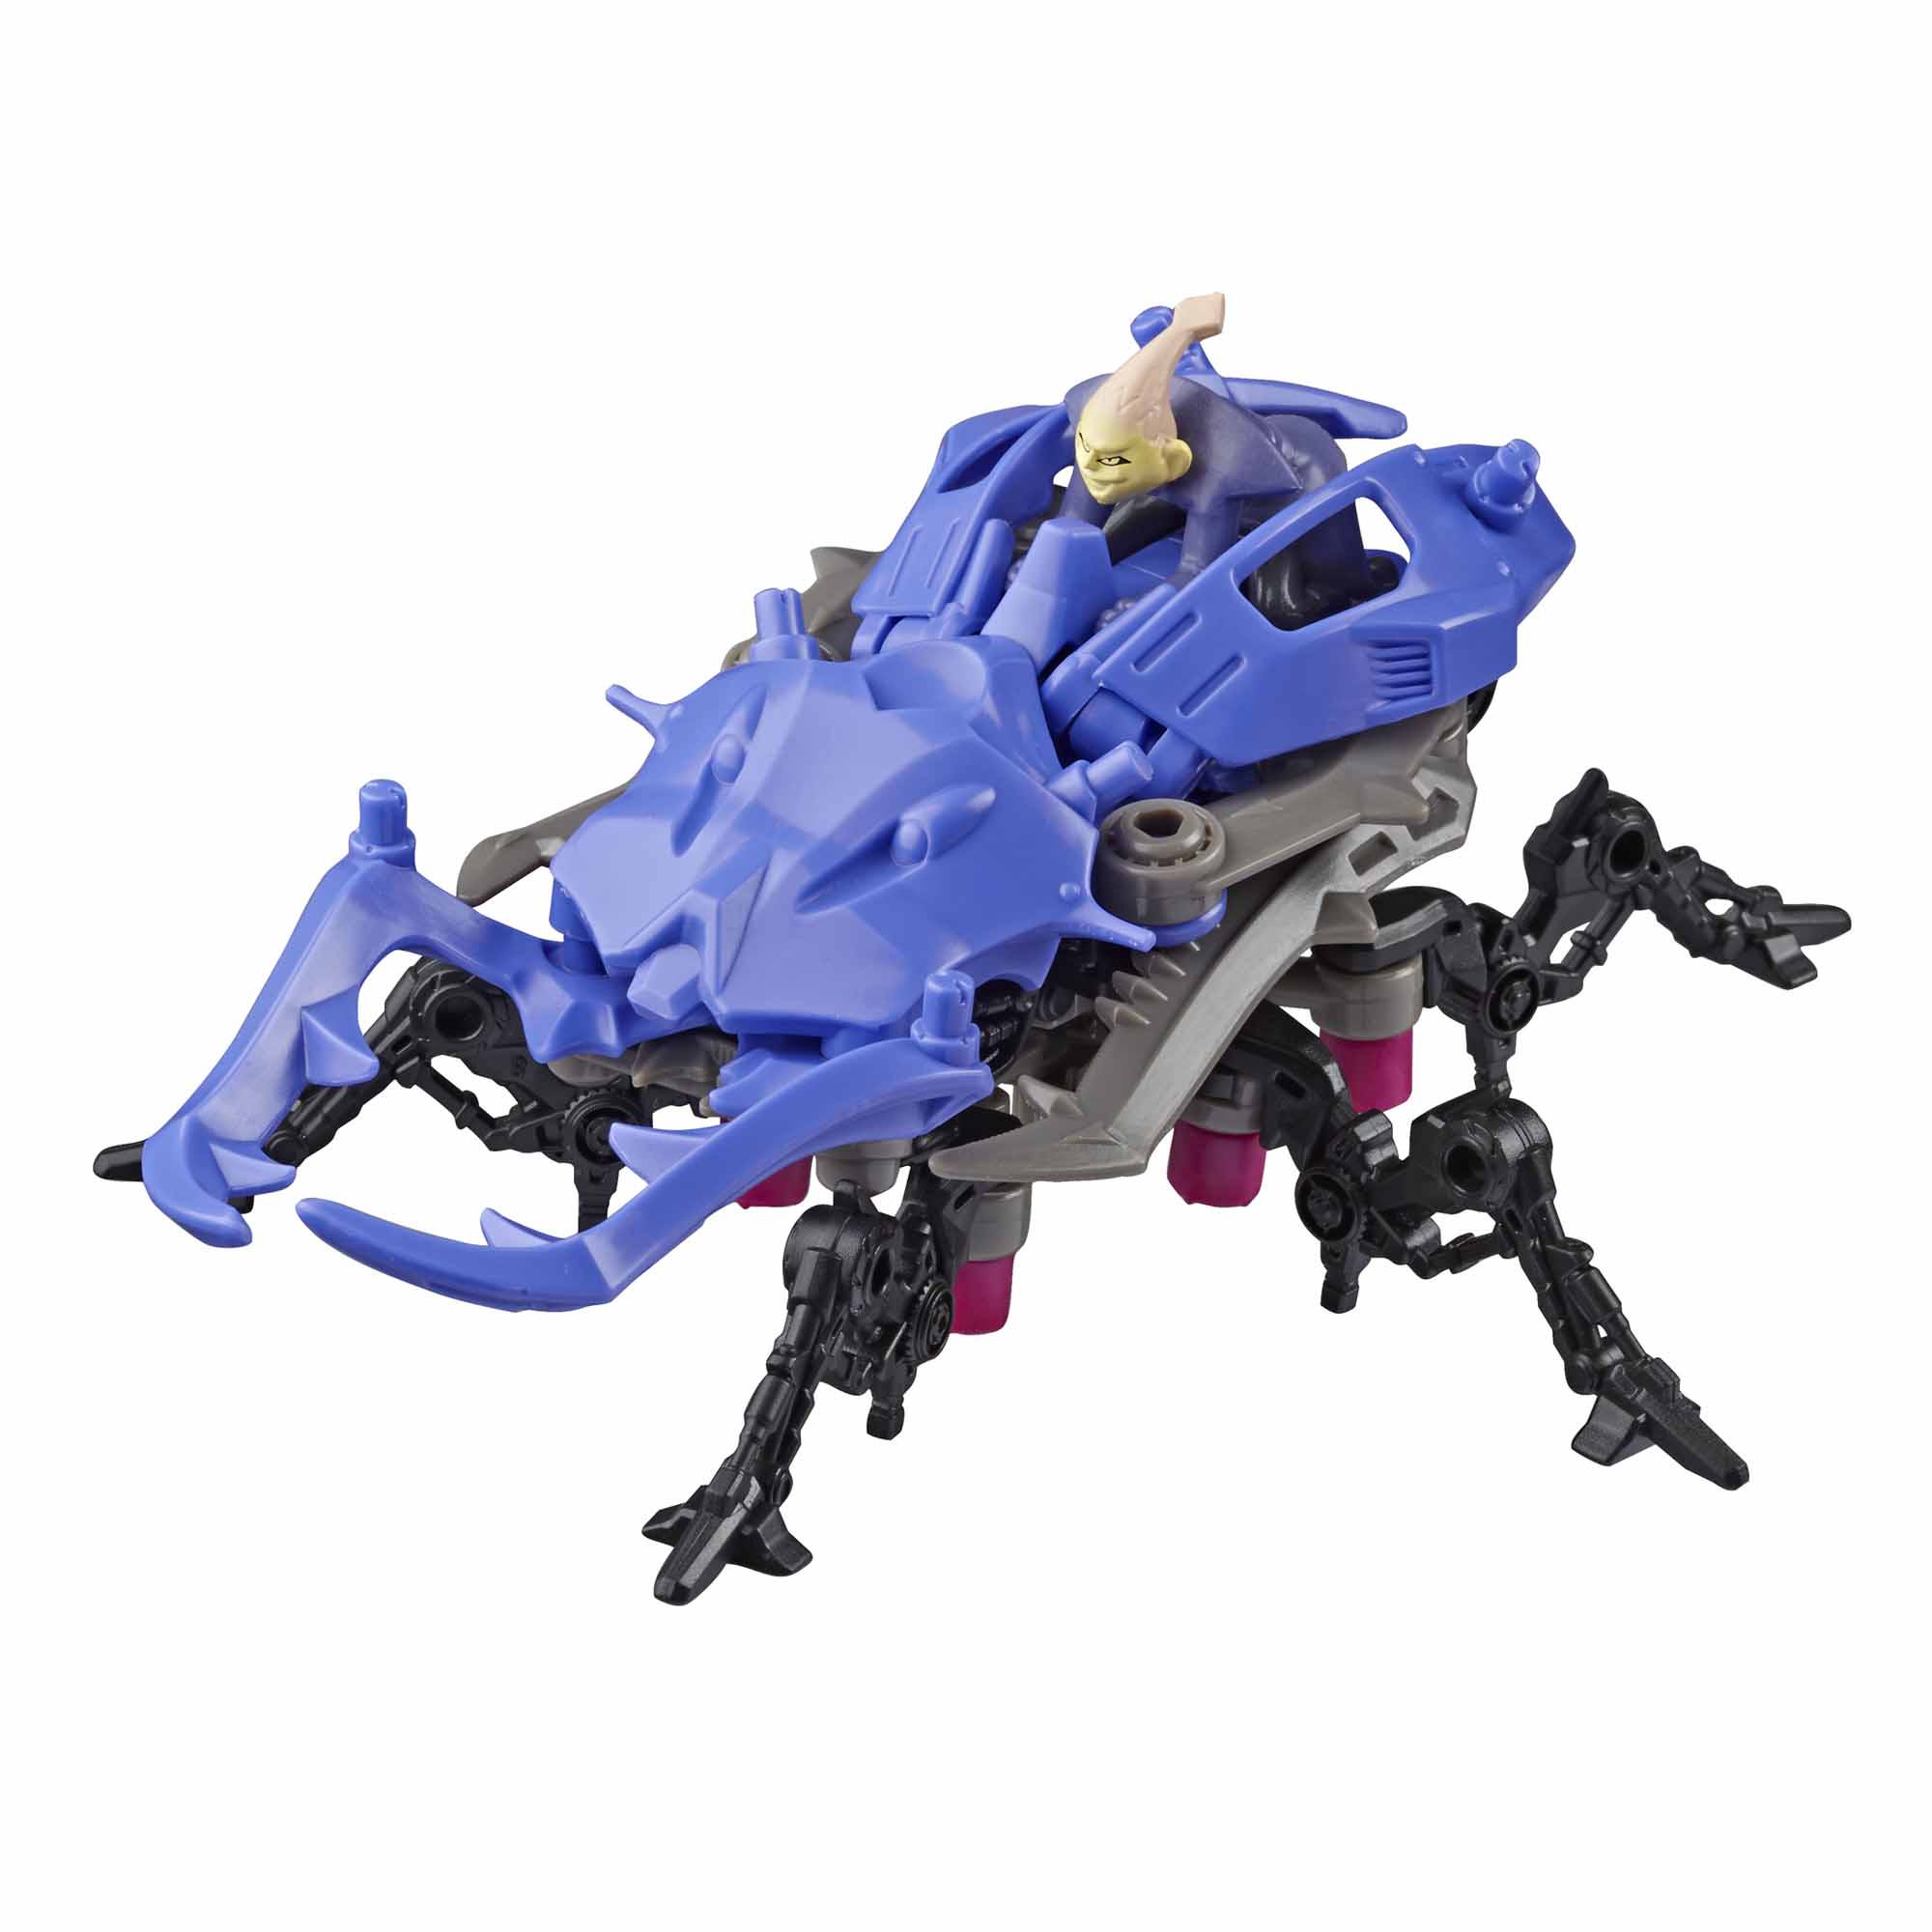 Zoids Mega Battlers Pincers - Beetle-Type Buildable Beast Figure, Wind-Up Motion - Kids Toys Ages 8 and Up, 29 Pieces